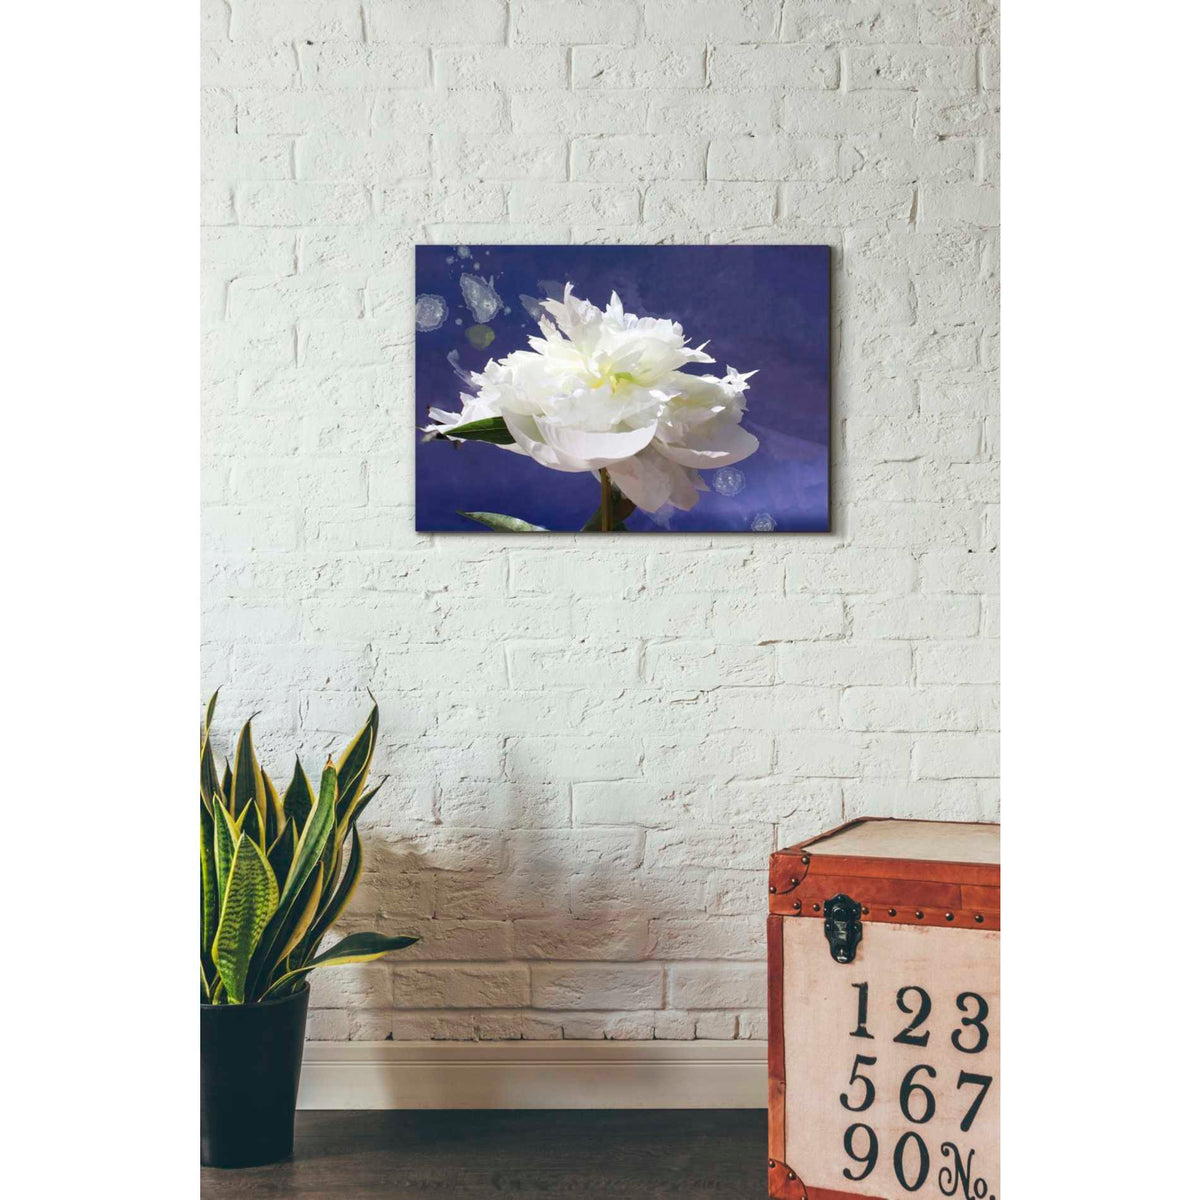 Epic Graffiti &#39;White Peony-Scents of Heaven&#39; by Irena Orlov, Giclee Canvas Wall Art